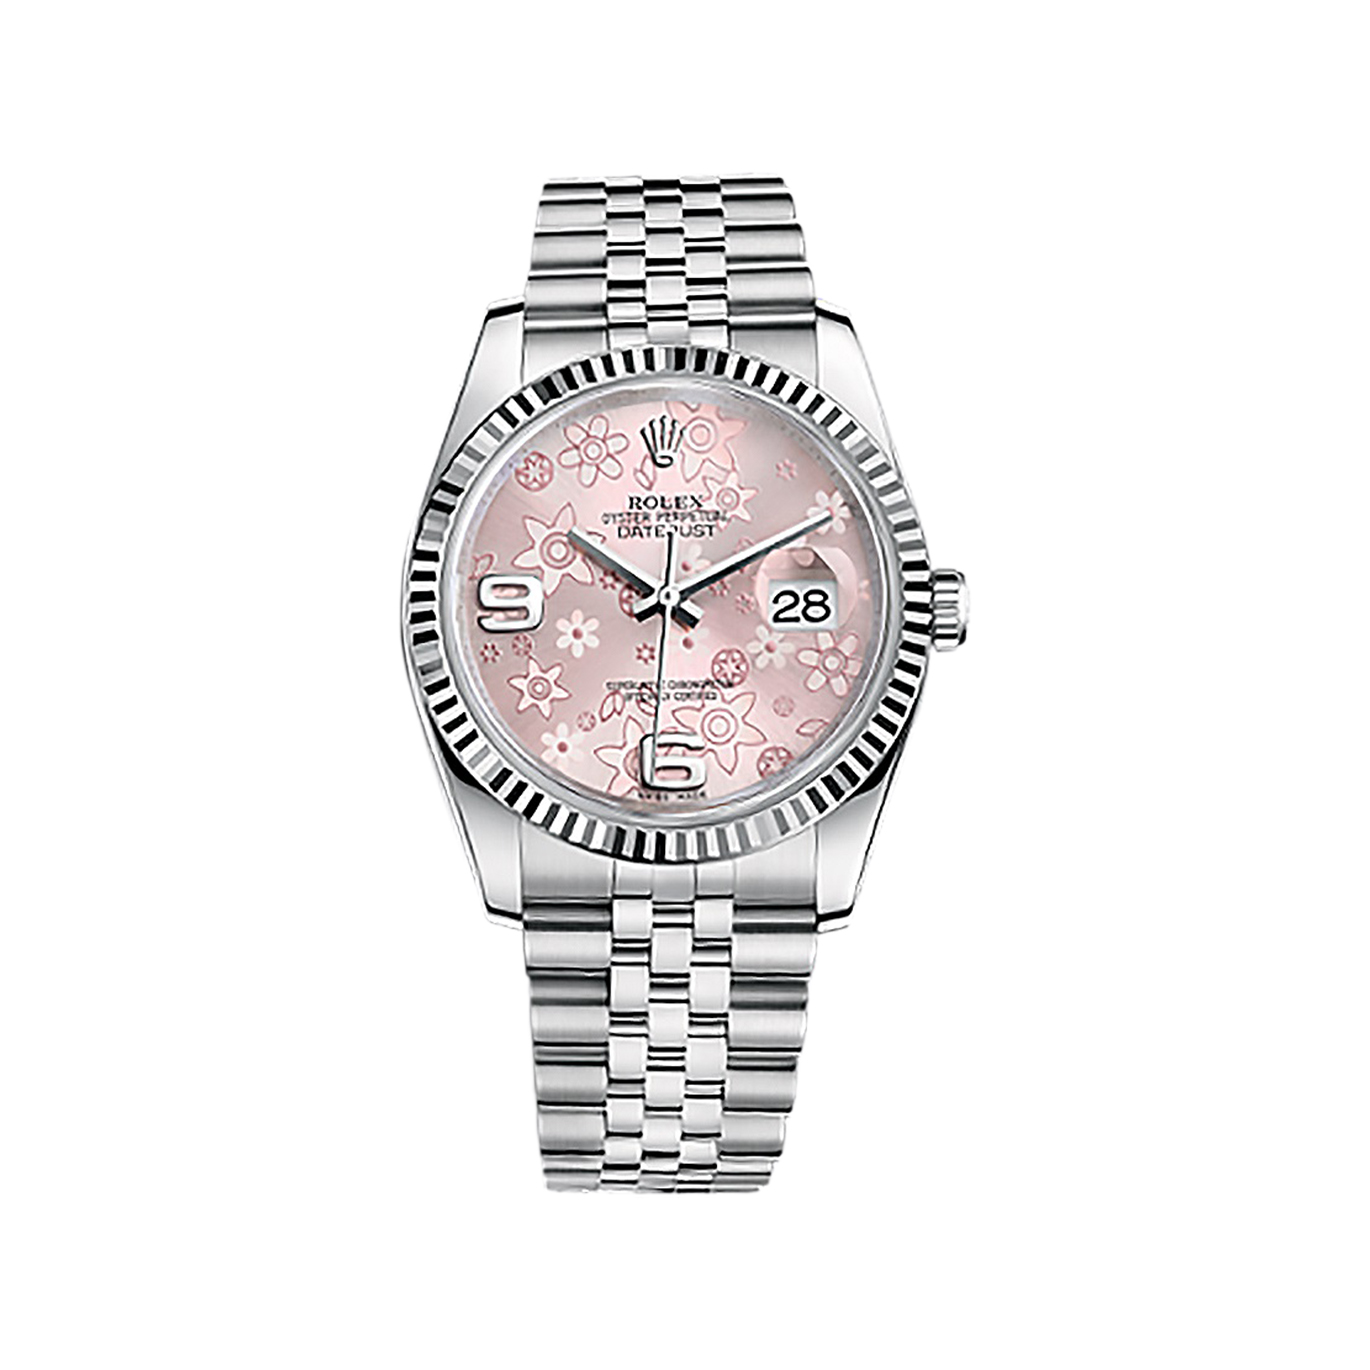 Datejust 36 116234 White Gold & Stainless Steel Watch (Pink Floral Motif)